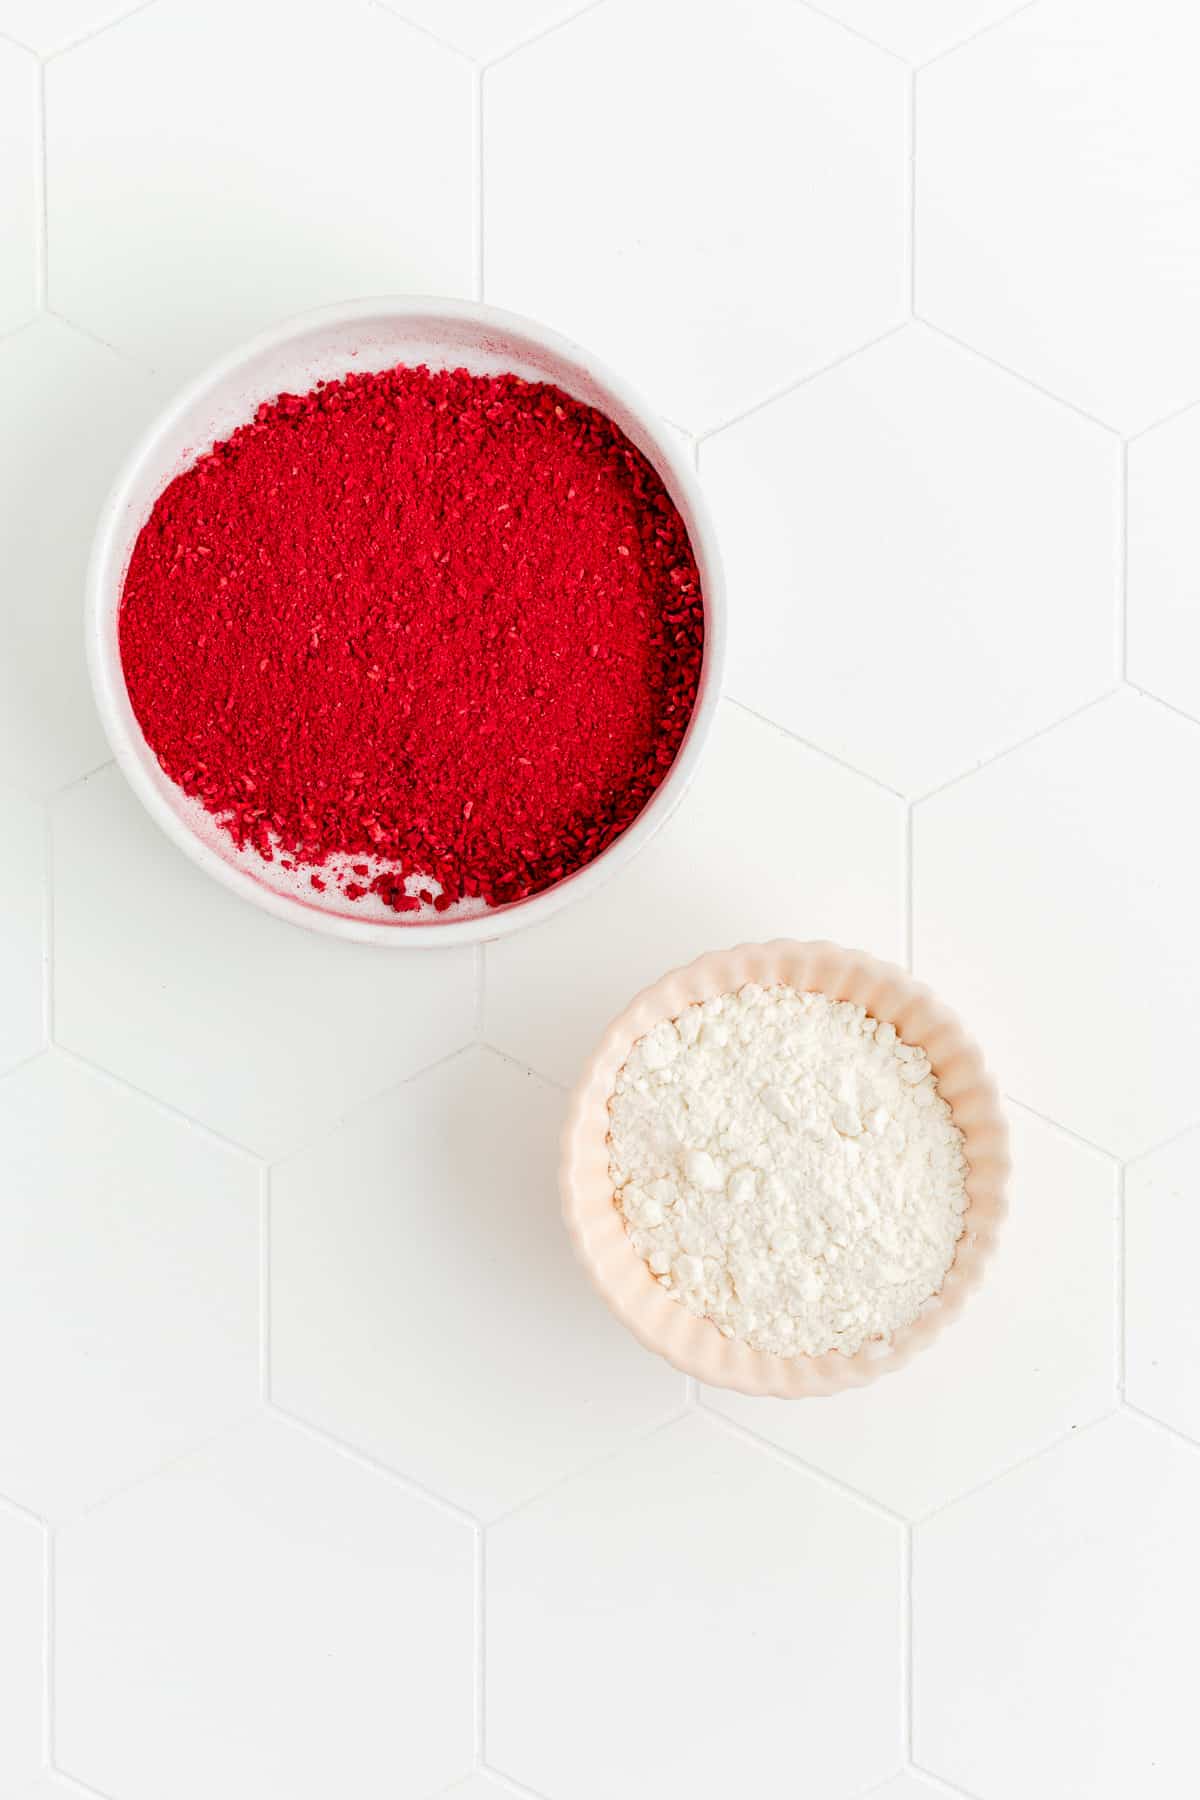 Crushed freeze dried raspberries and flour in individual bowls on a white background.